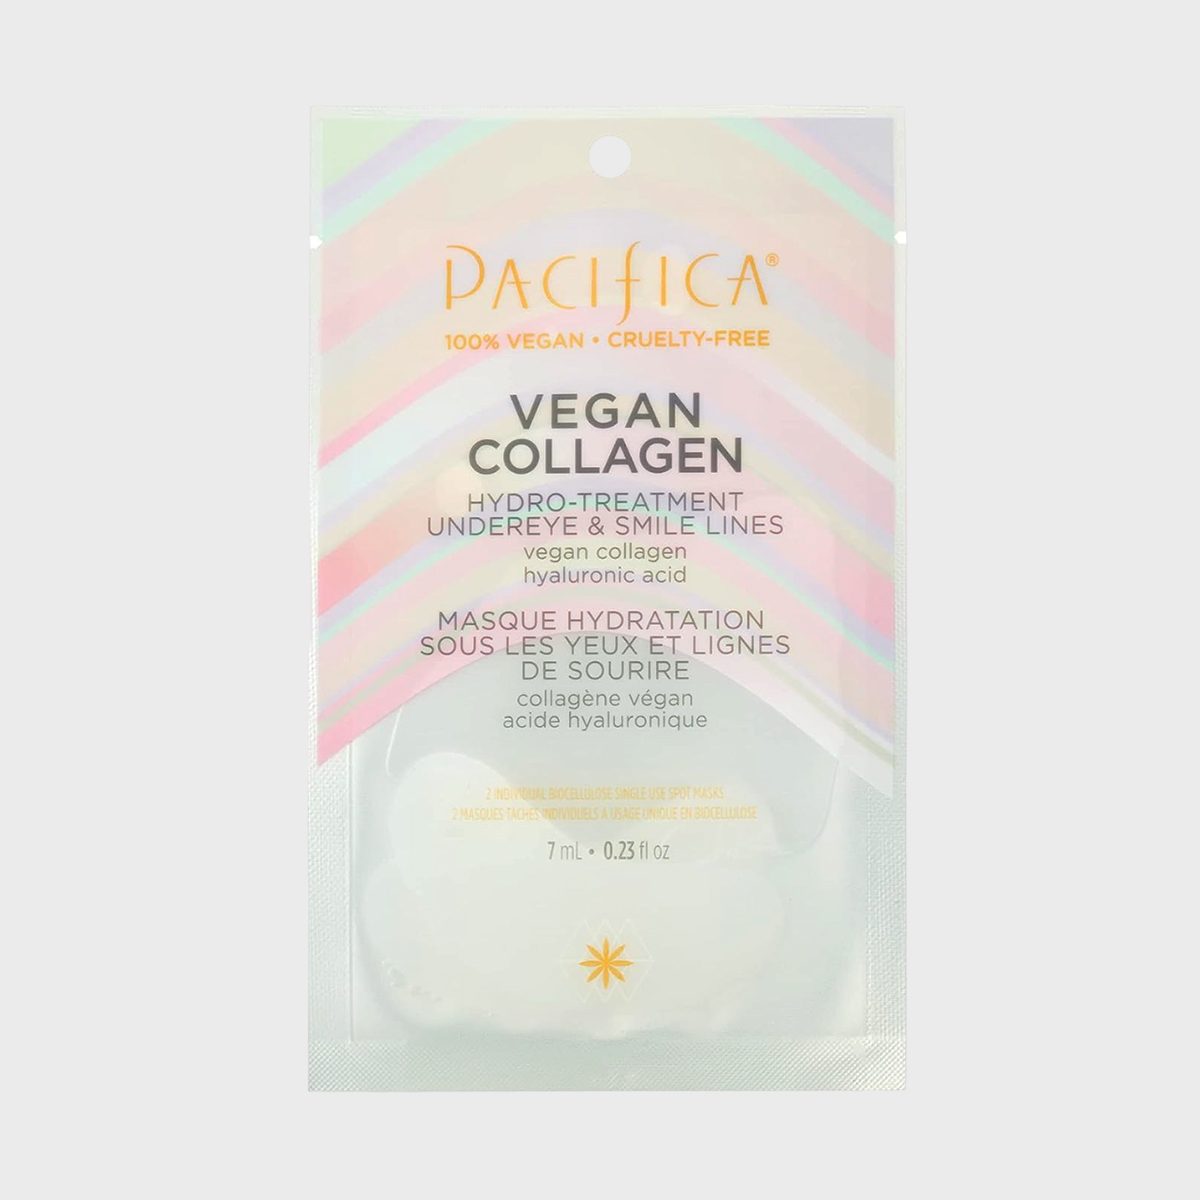 Pacifica Vegan Collagen Hydro Treatment Eye Patches